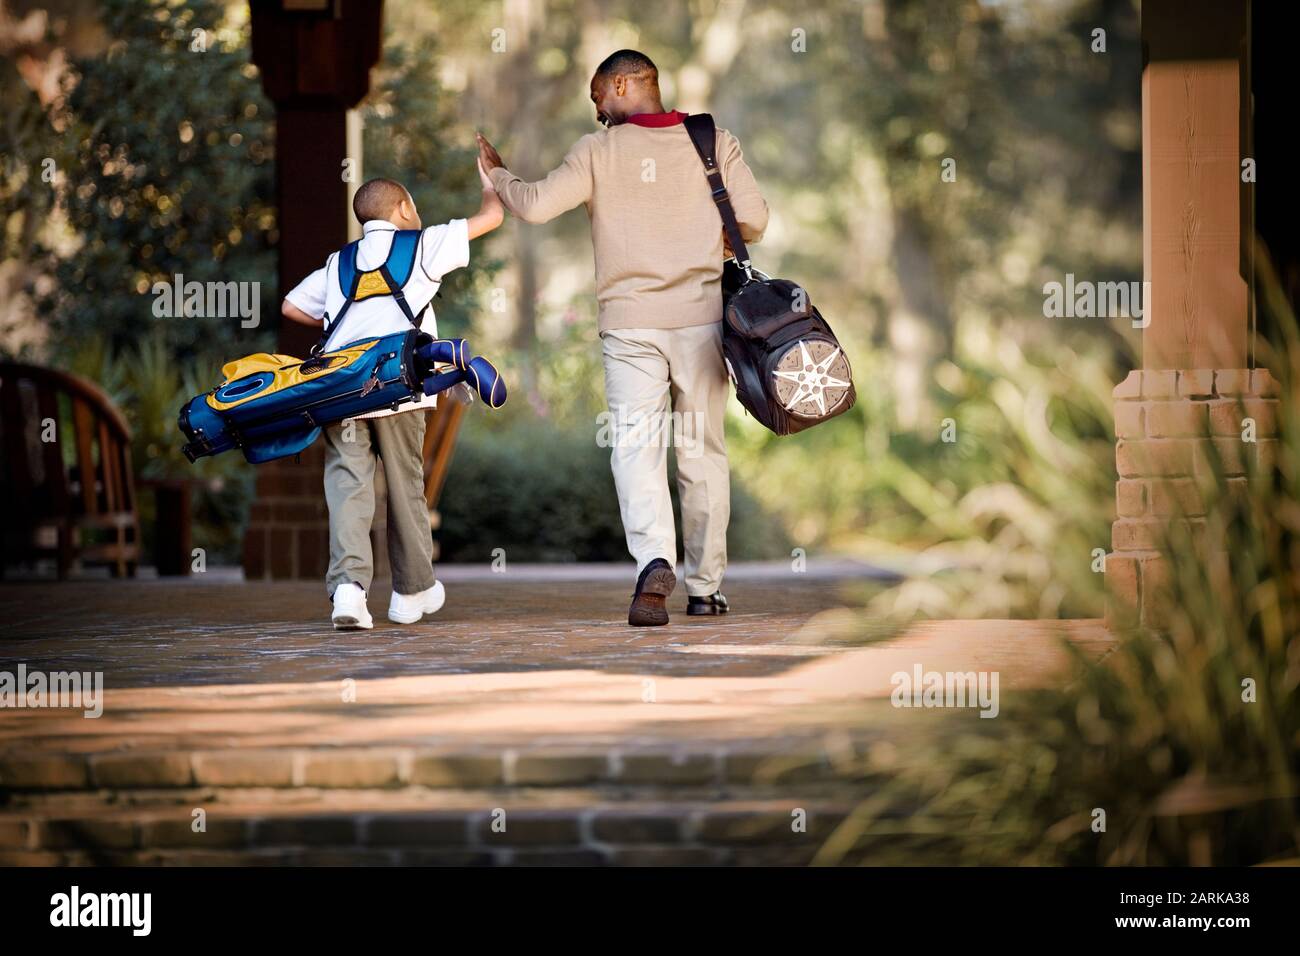 Father and son carrying golf bags and high fiving Stock Photo